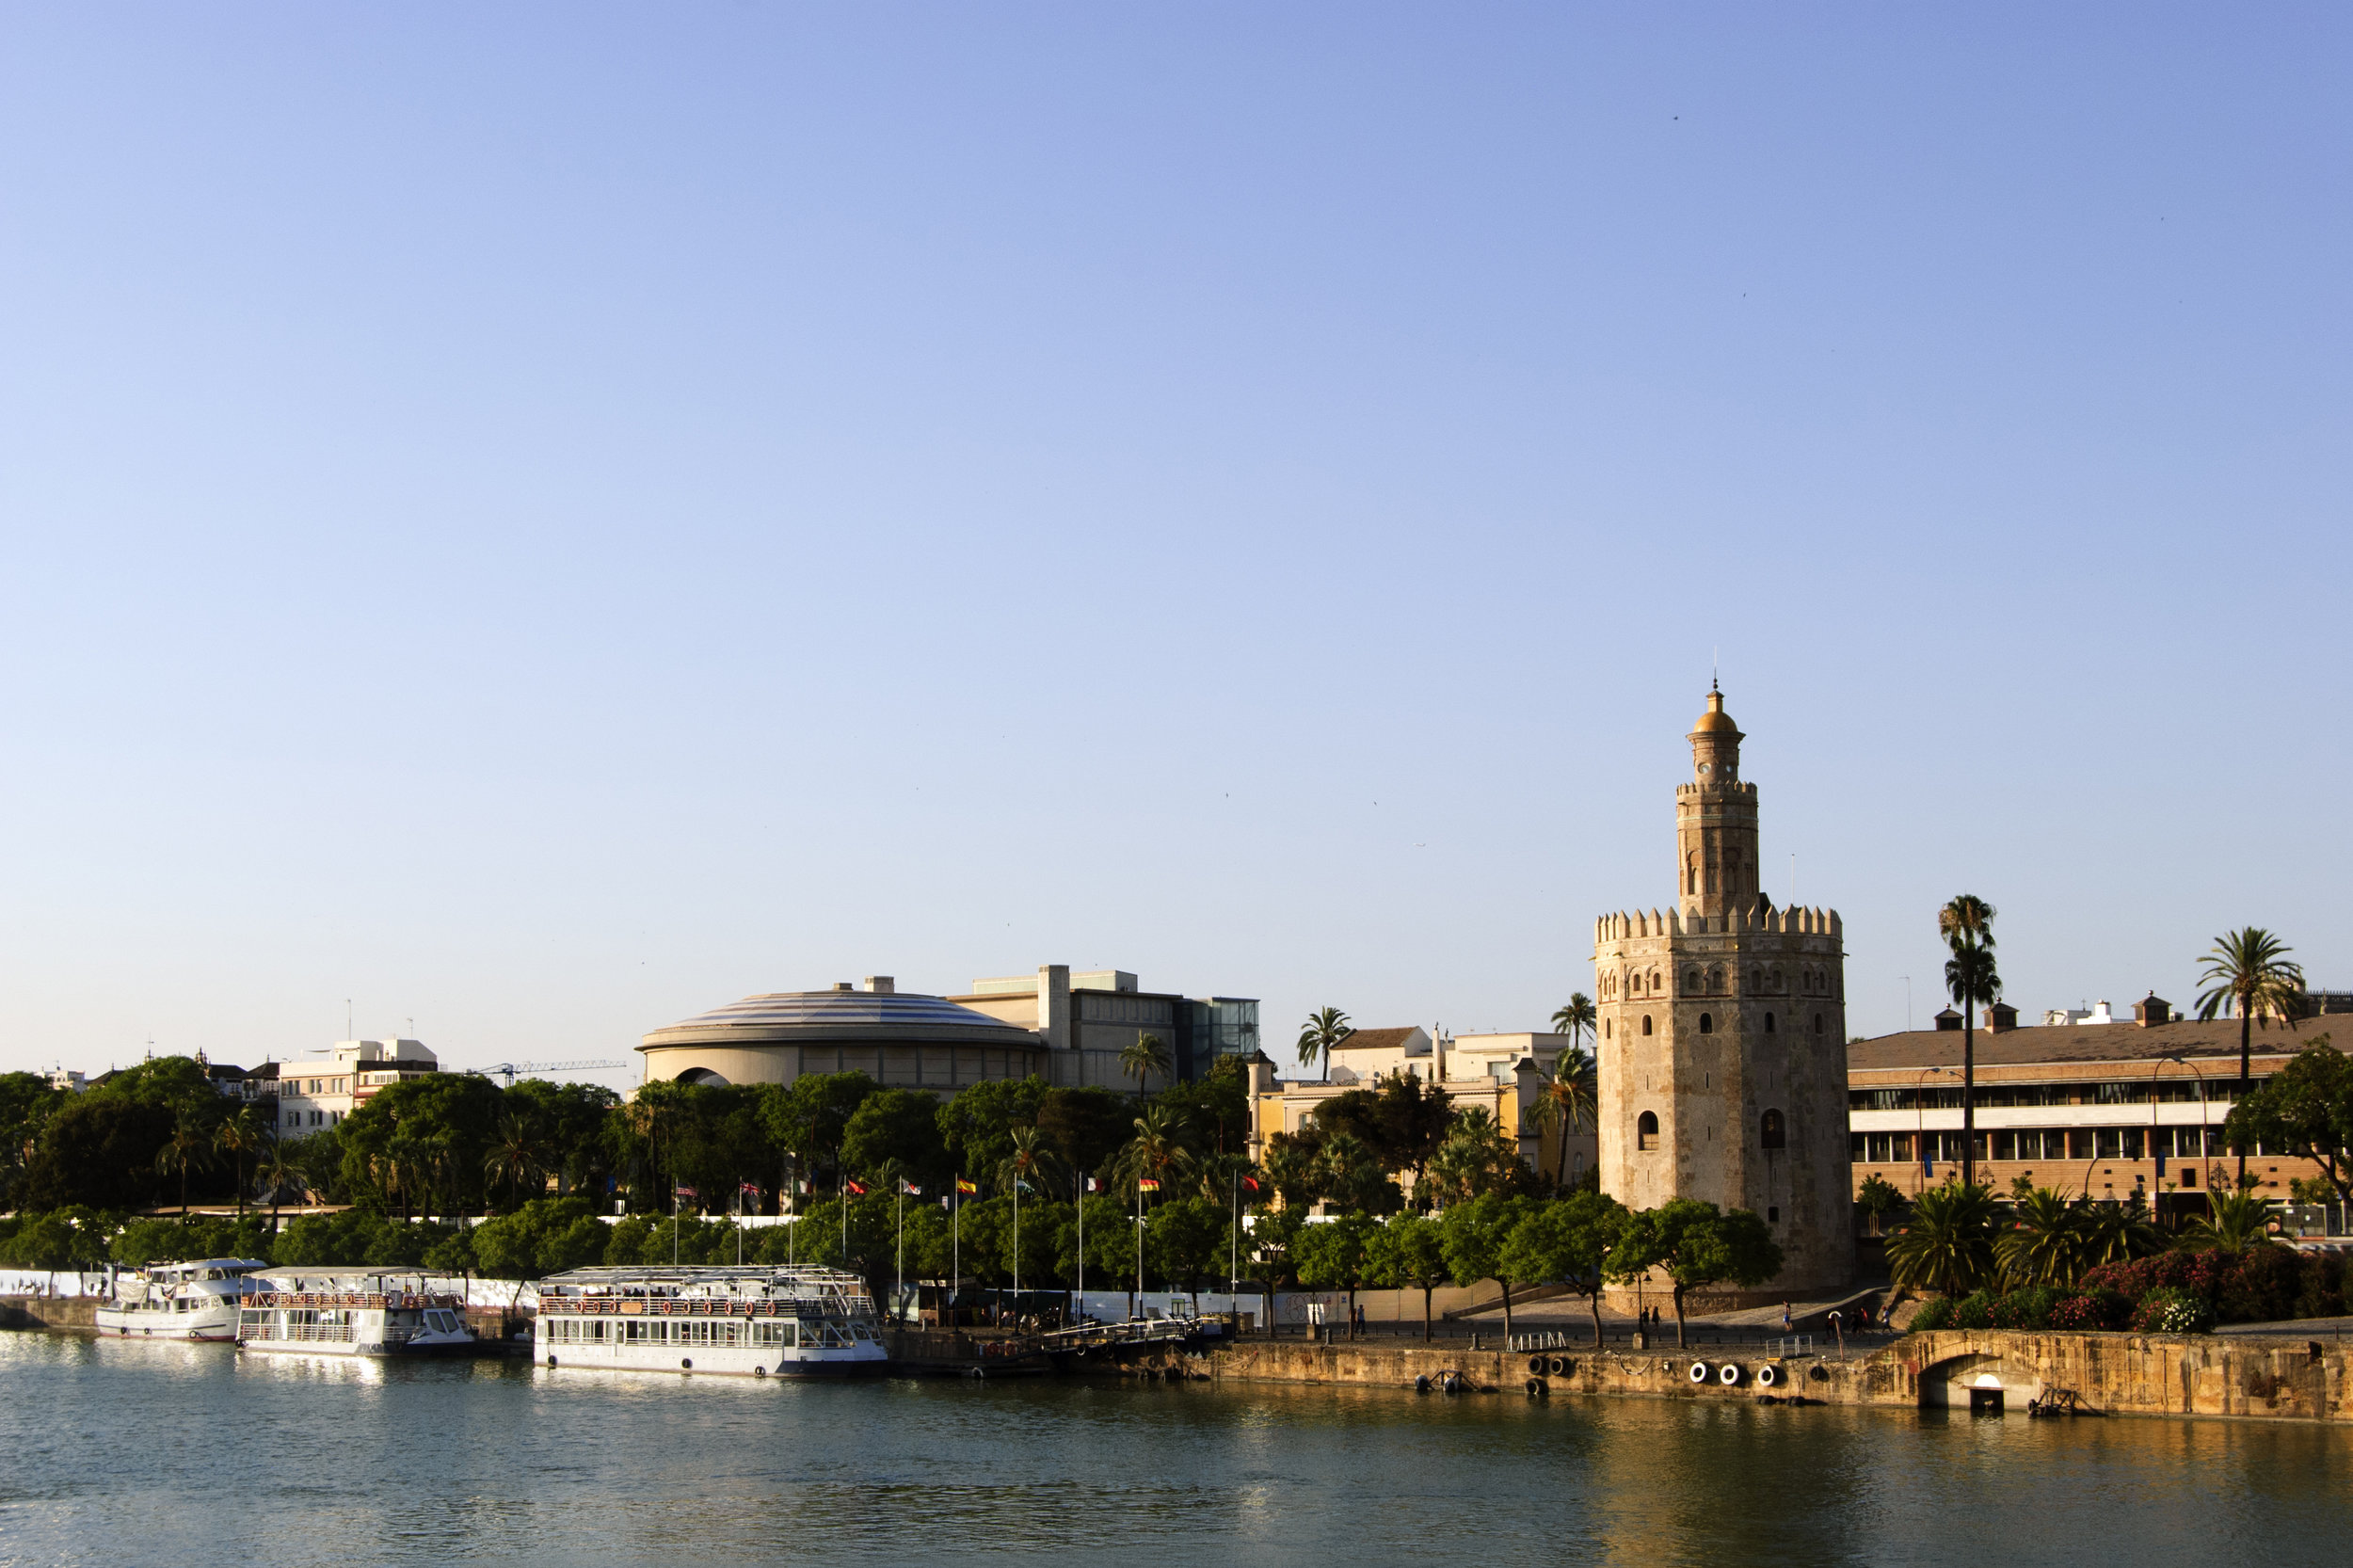 Panoramic-view-of-Seville-riverbank-with-the-Torre-del-Oro-833234404_3830x2553.jpeg